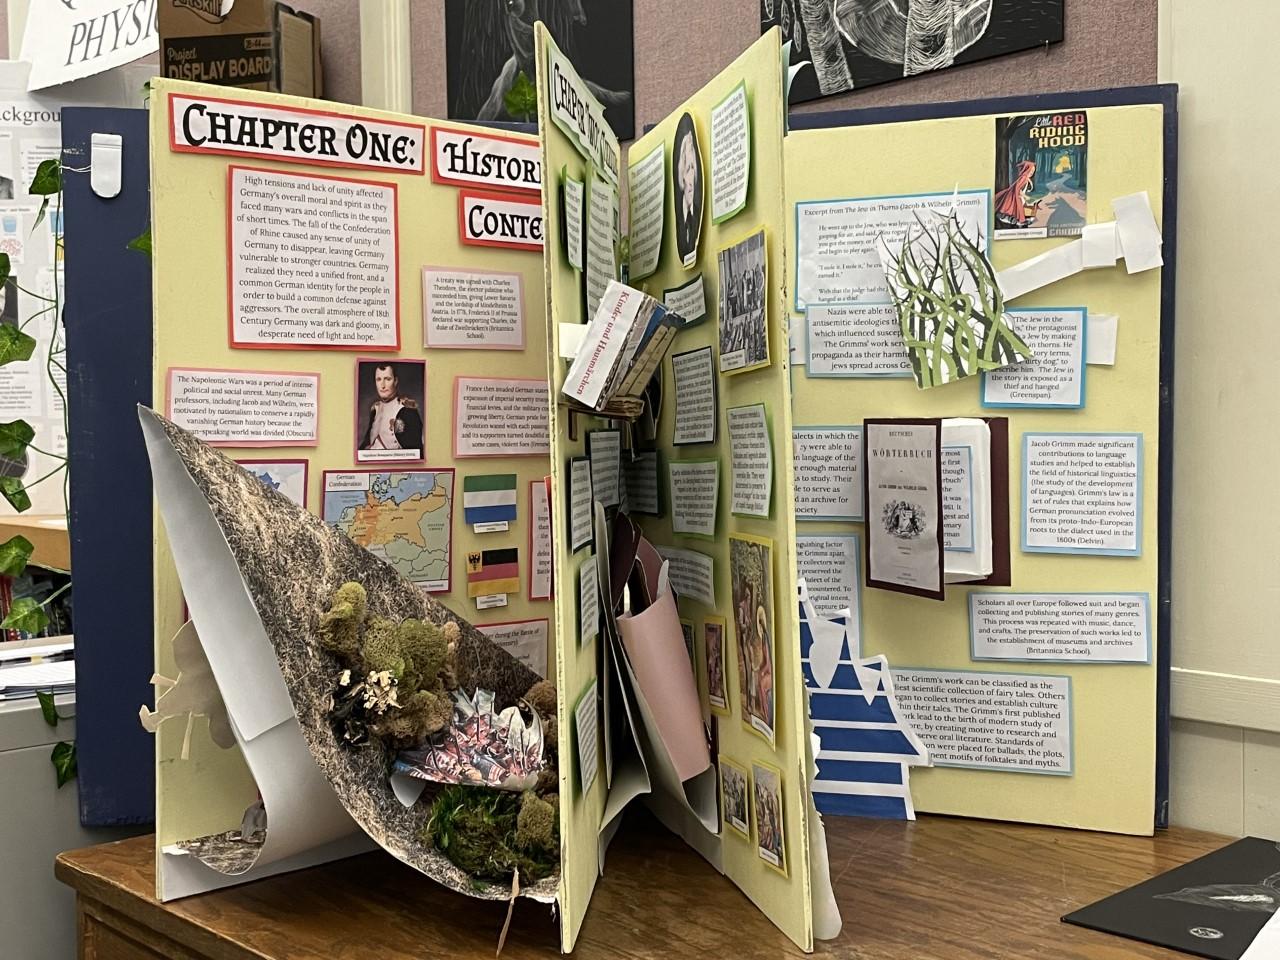 "The Brothers Grimm: The Tale of Two Brothers Who Changed the Face of Literature" exhibit by South City High sophomores Sabrina Aquino, Angeline Gloria, Josephine Harsana.